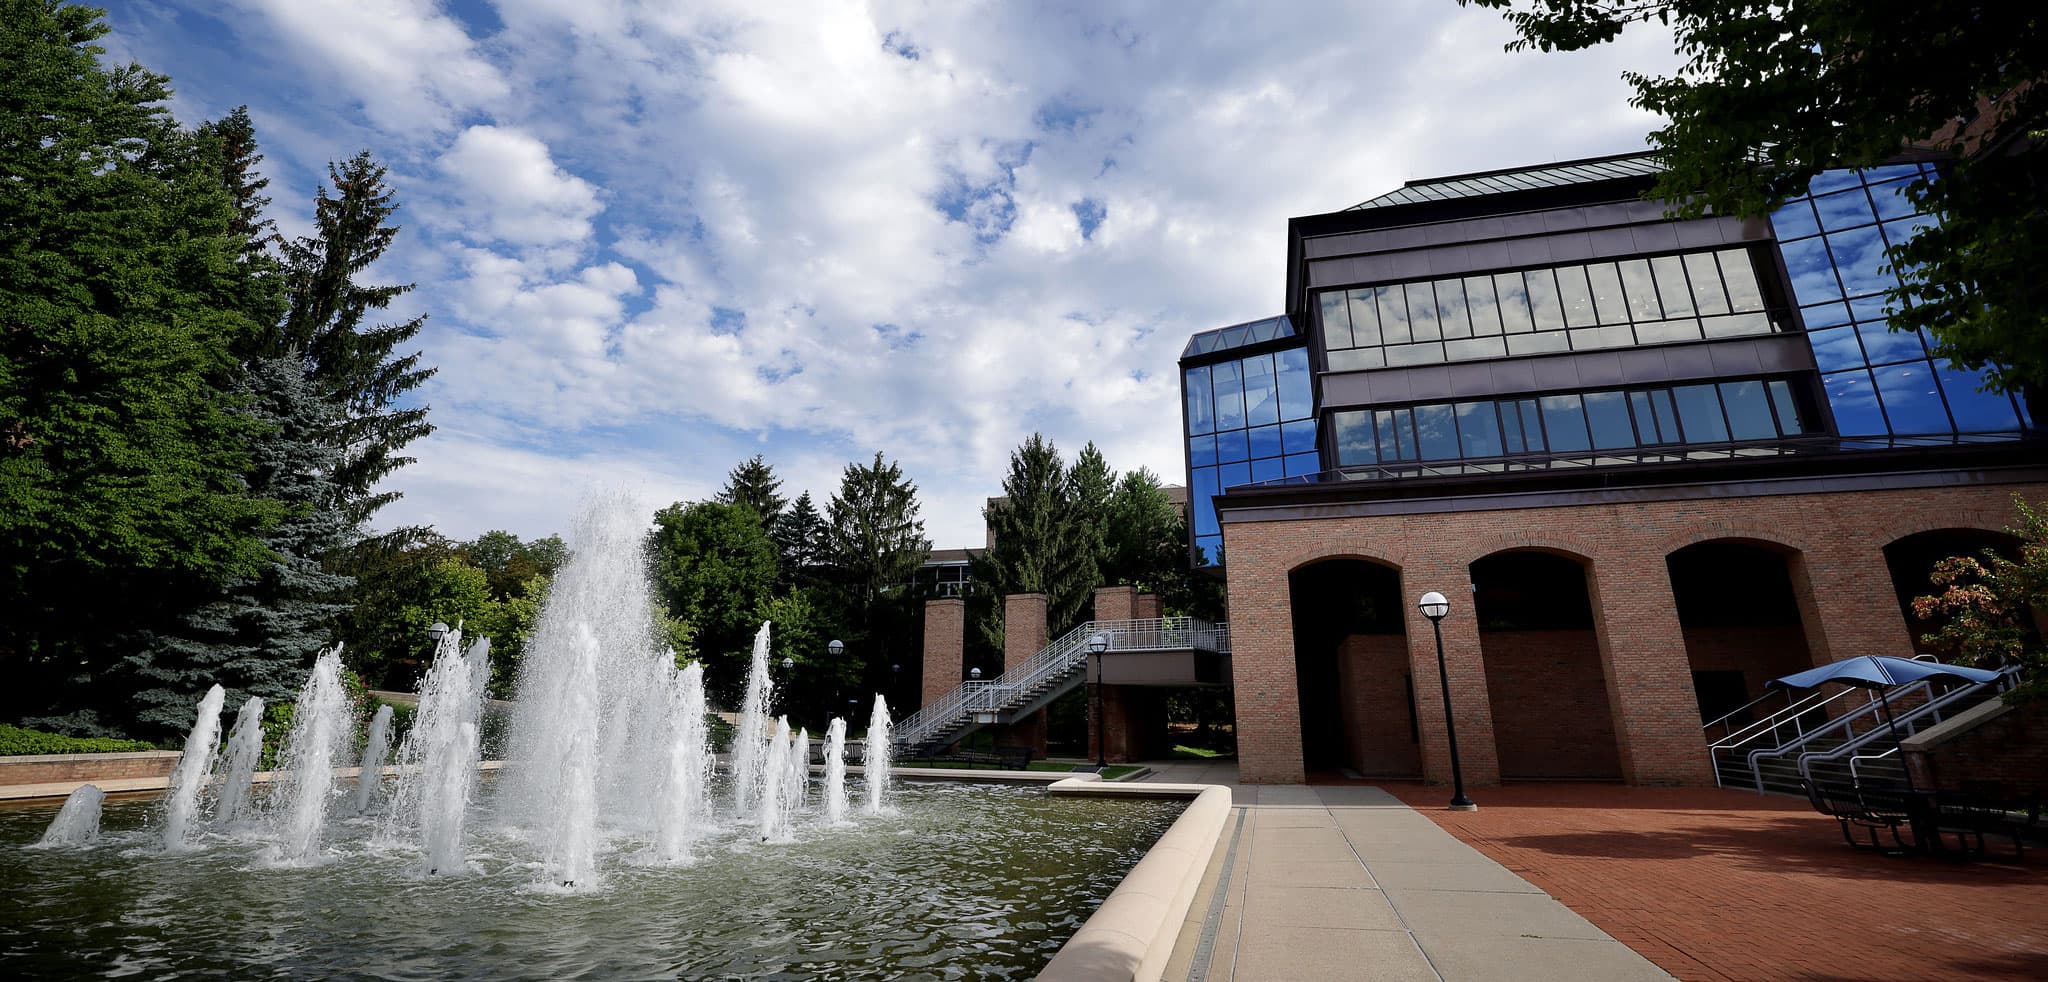 North campus scene: Fountain and a corner of the Lurie Engineering Center.